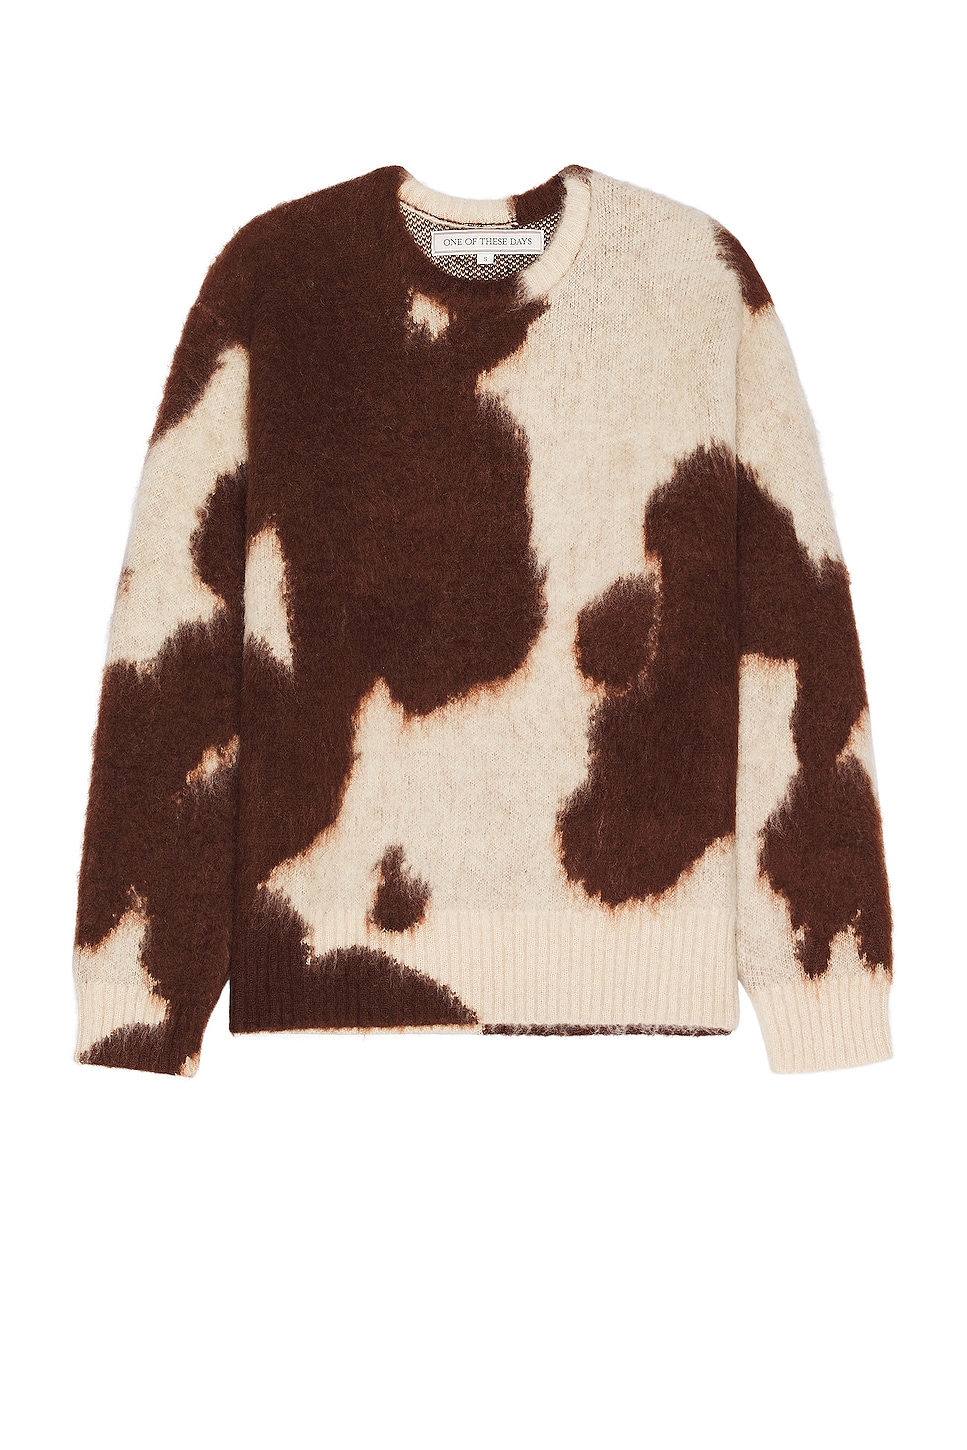 Image 1 of ONE OF THESE DAYS Horse Coat Sweater in Bone & Brown